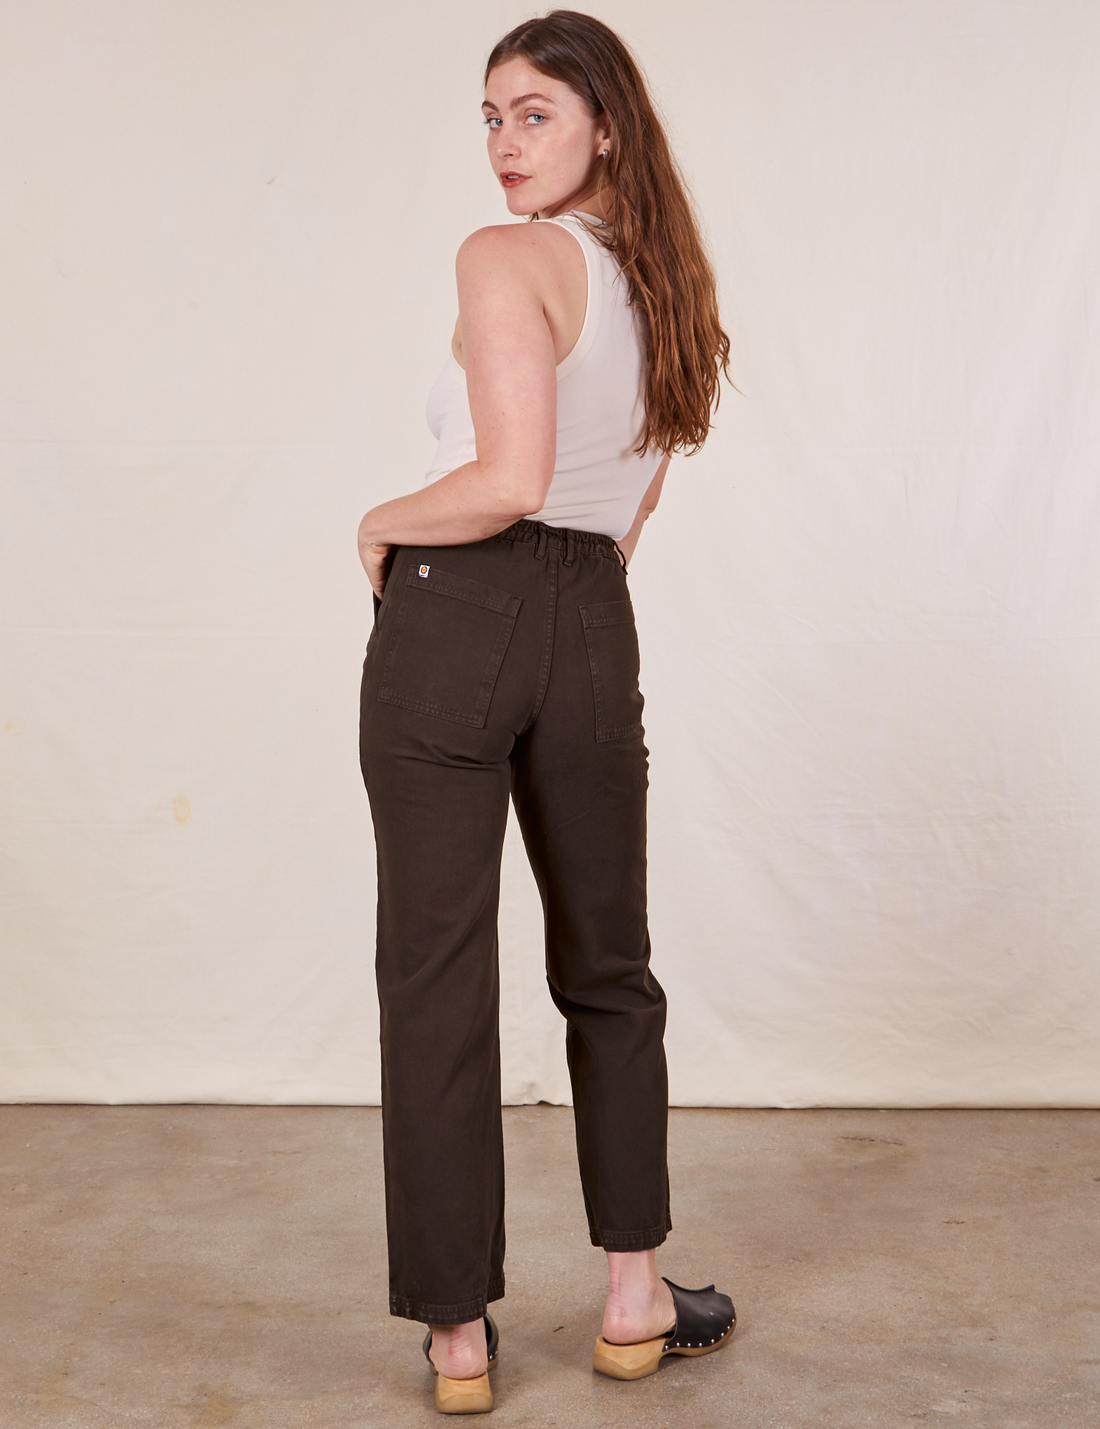 Work Pants in Espresso Brown back view on Allison wearing vintage off-white Tank Top